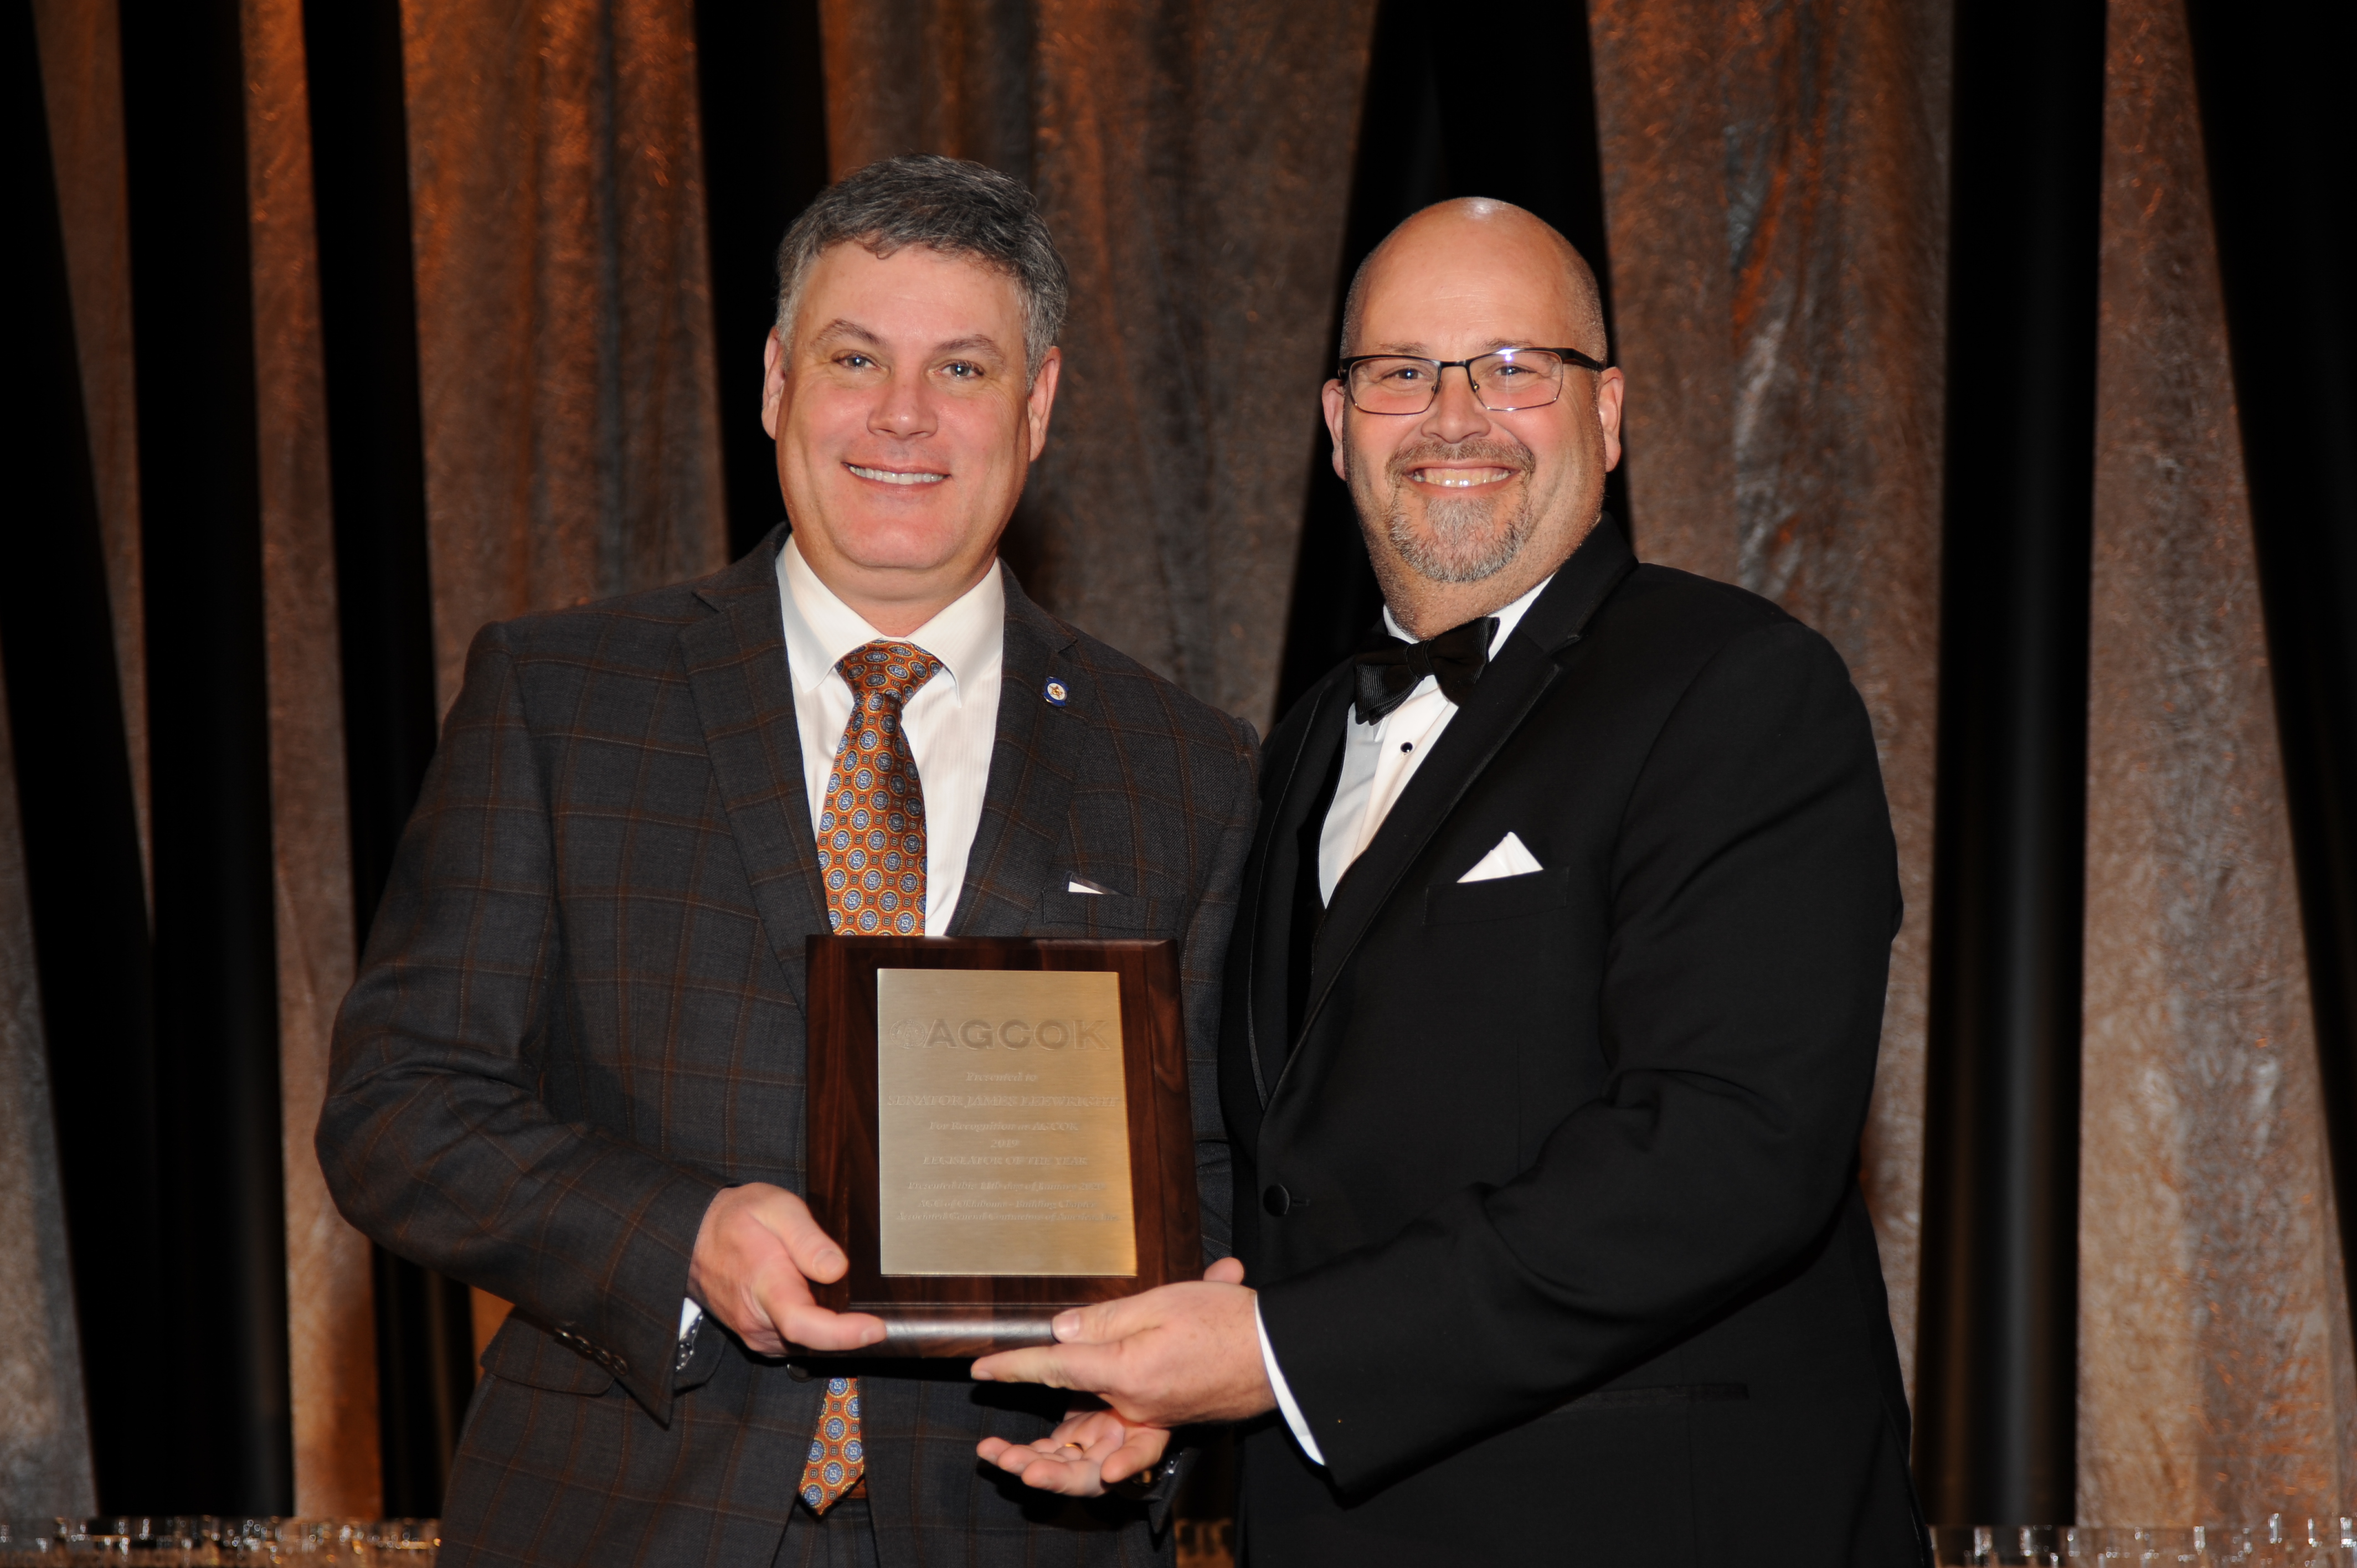 Sen. James Leewright, R-Bristow, is given the Legislator of the Year award by AGCOK President Jeff Kusler.